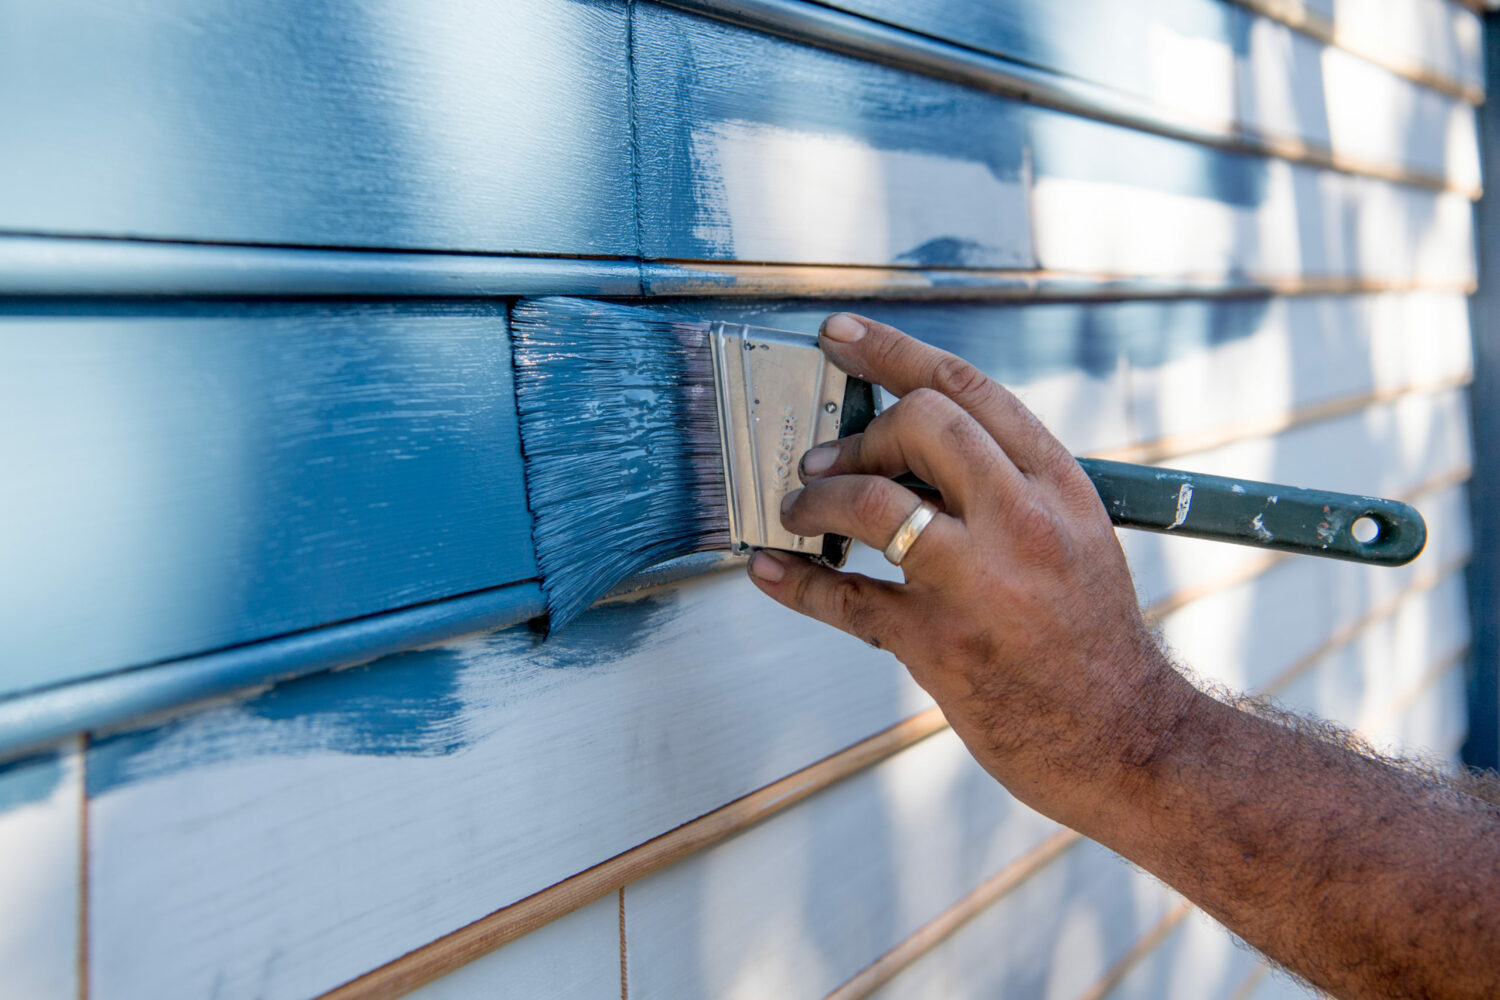 A hand is shown painting a bright blue on a historic house's shingles.